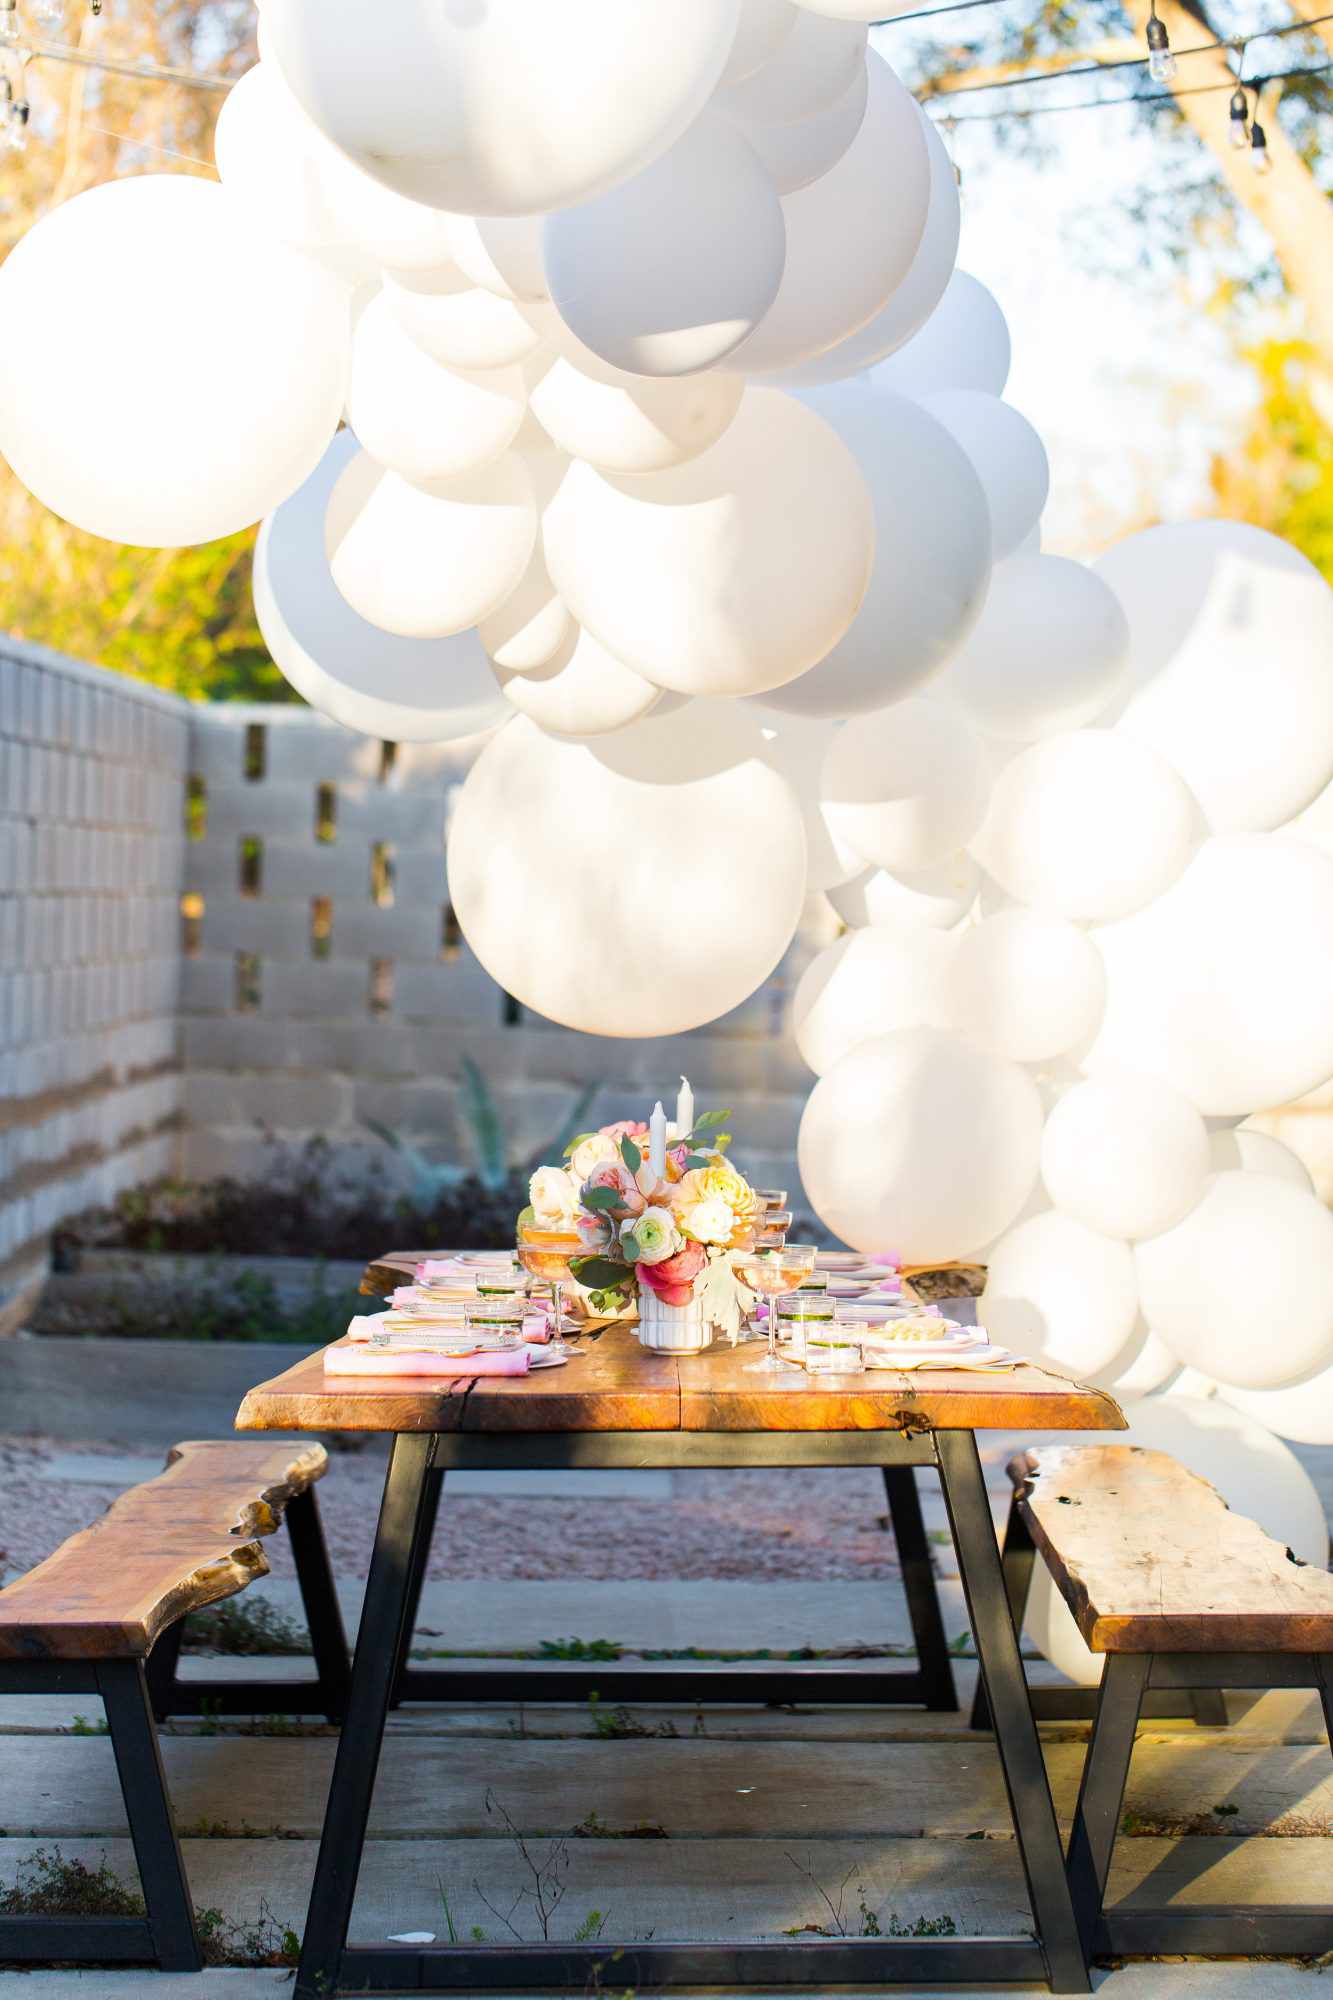 plan bridal shower - dinner table with decorations and ballons